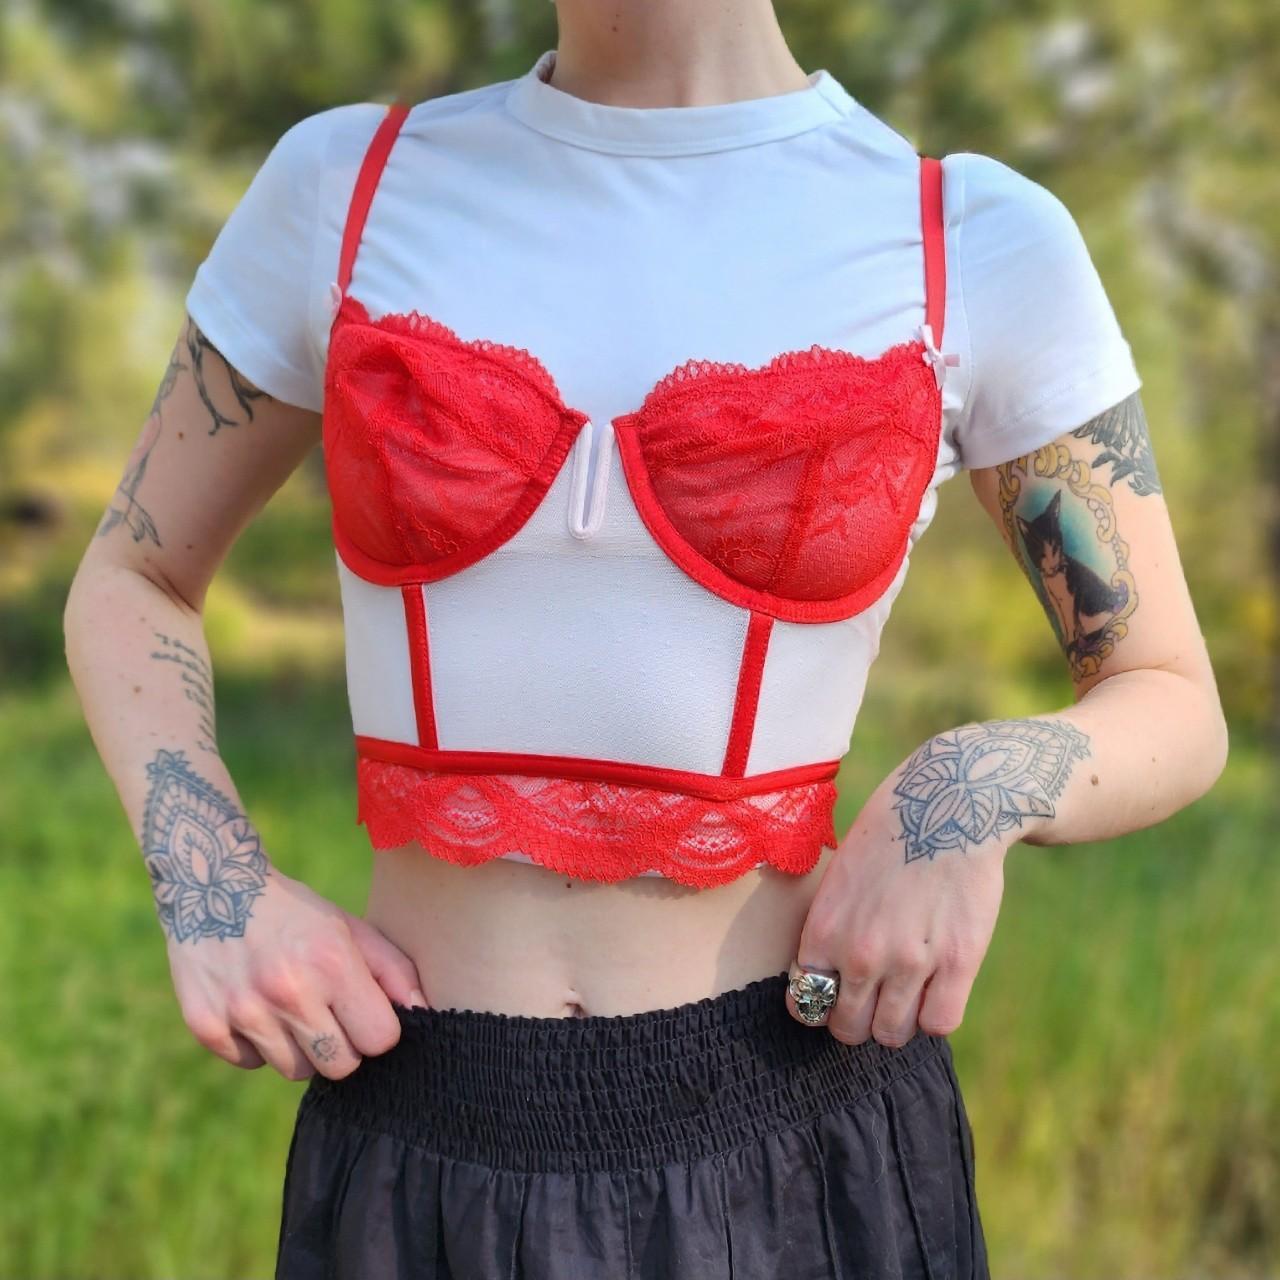 Dreamy red lace corset top Sheer mesh fabric with - Depop